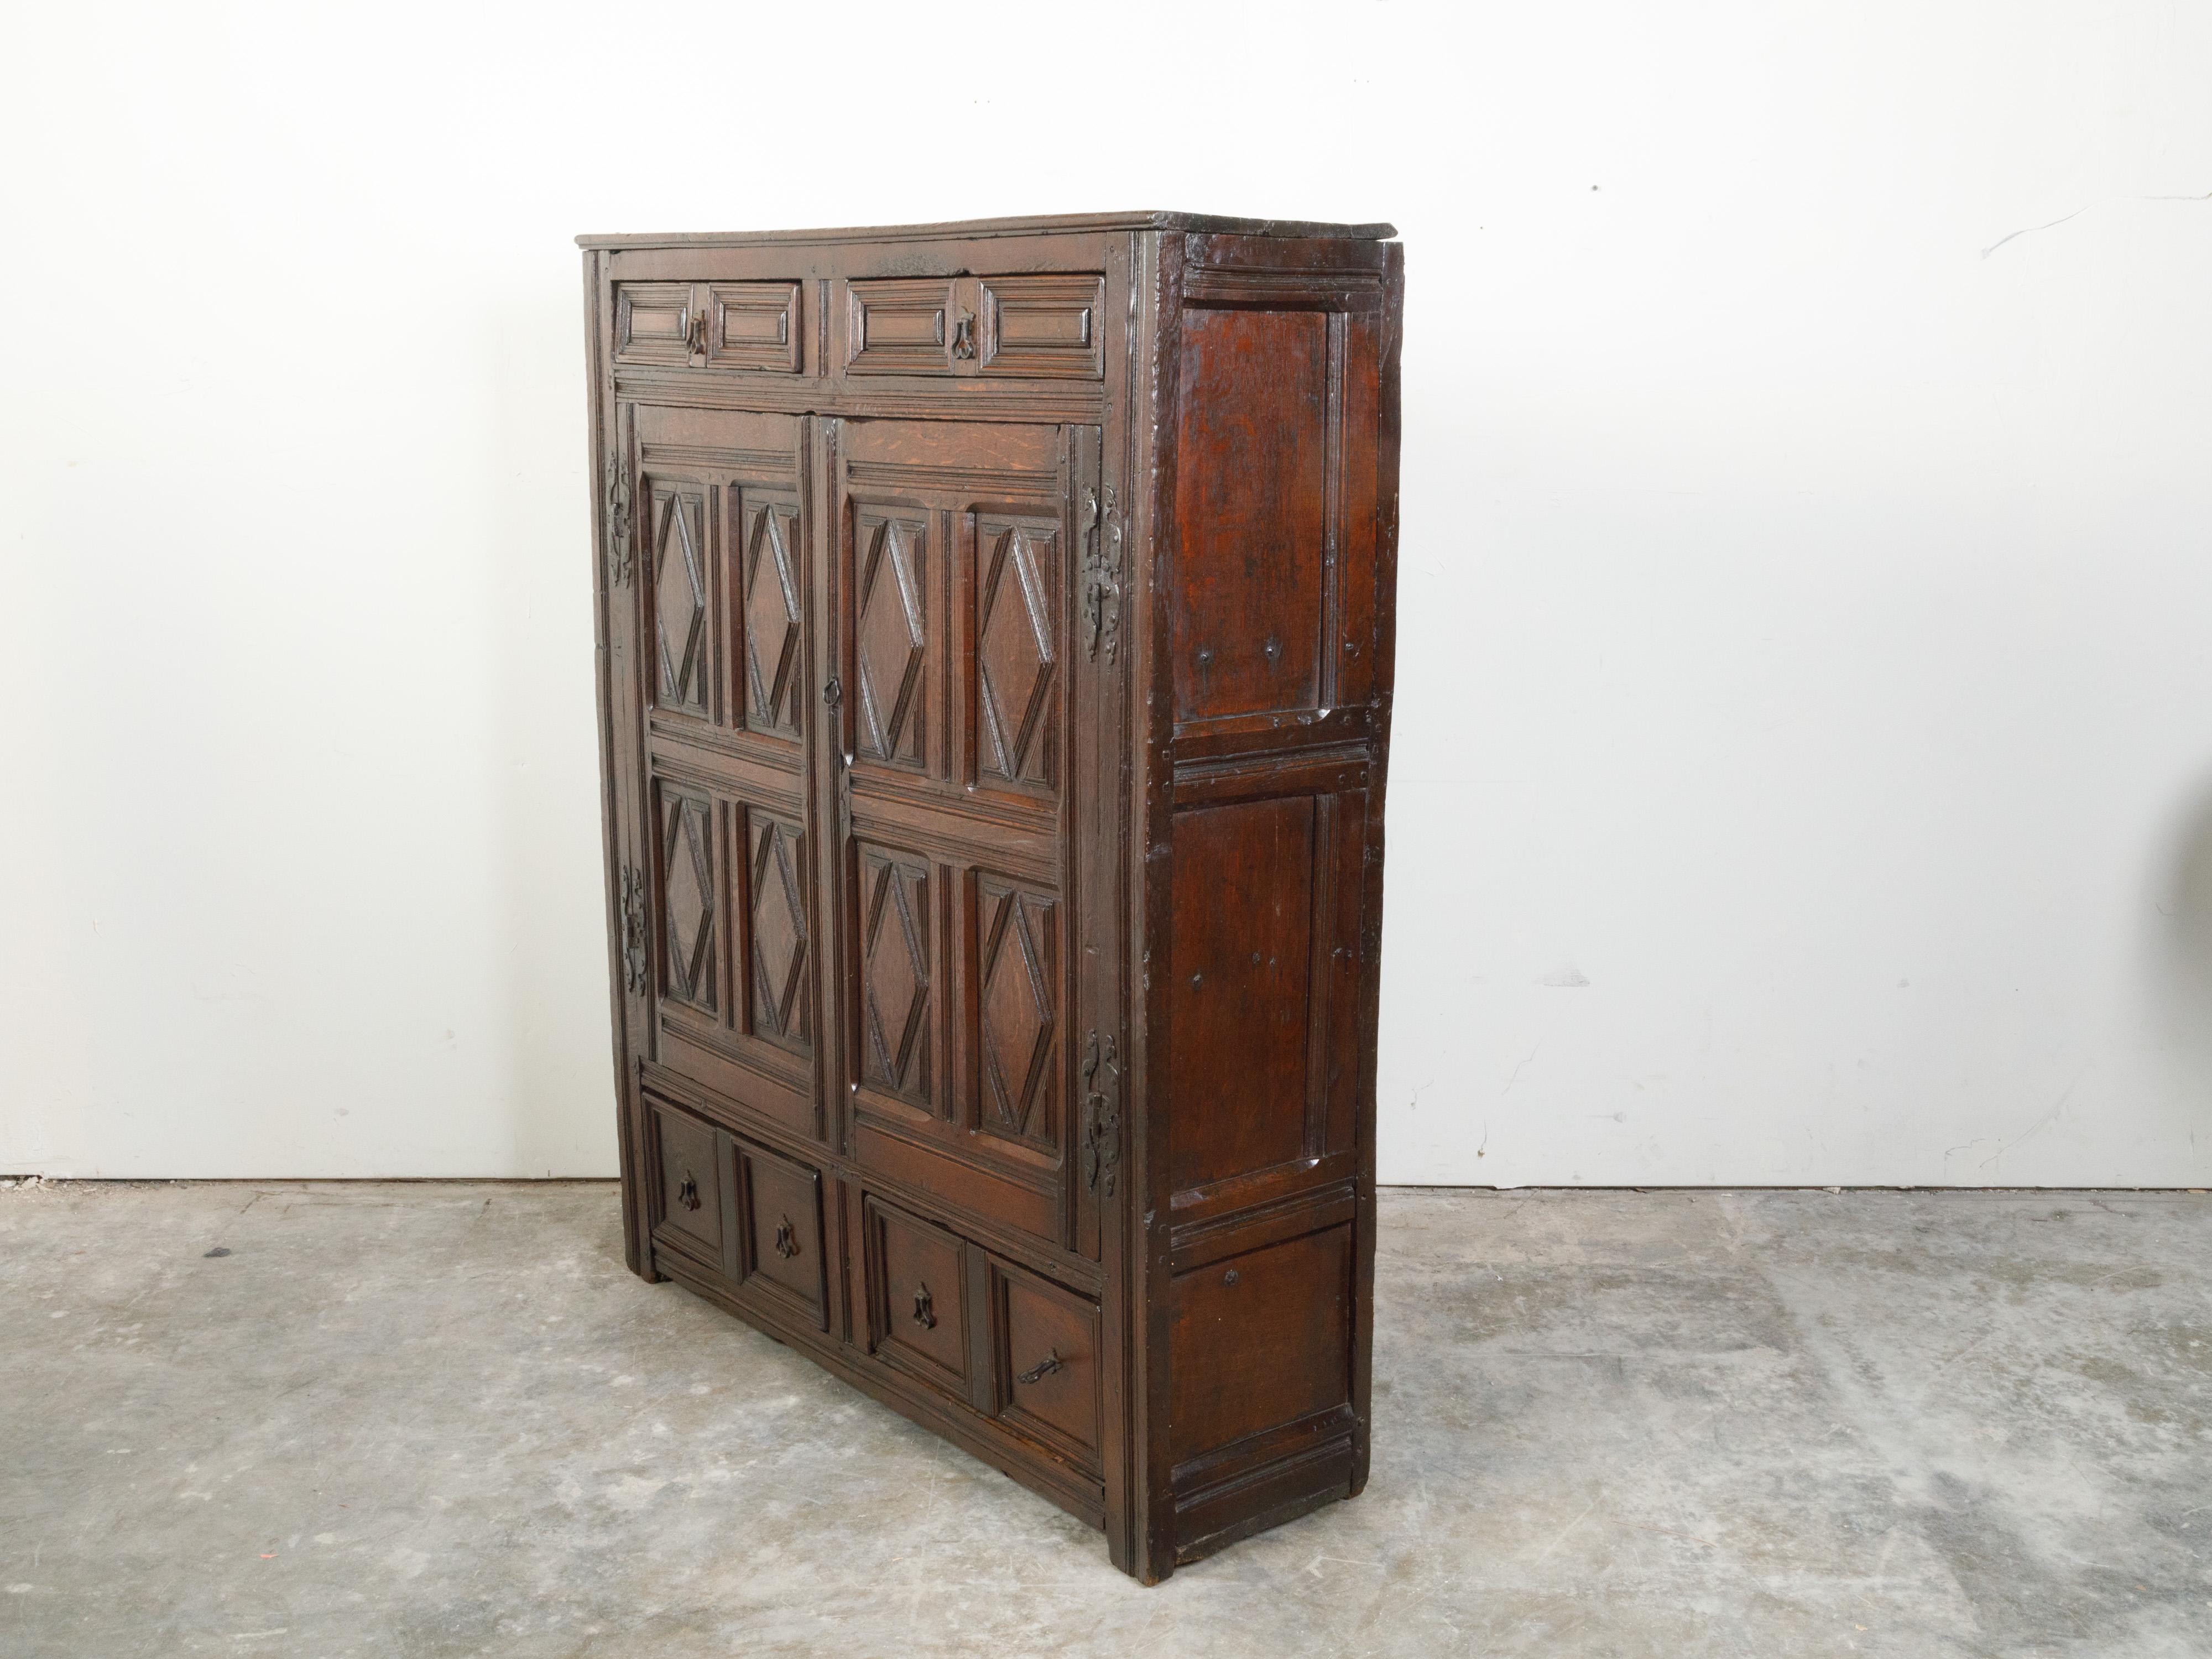 English 1800s Wooden Court Cupboard with Doors, Drawers and Diamond Motifs In Good Condition For Sale In Atlanta, GA